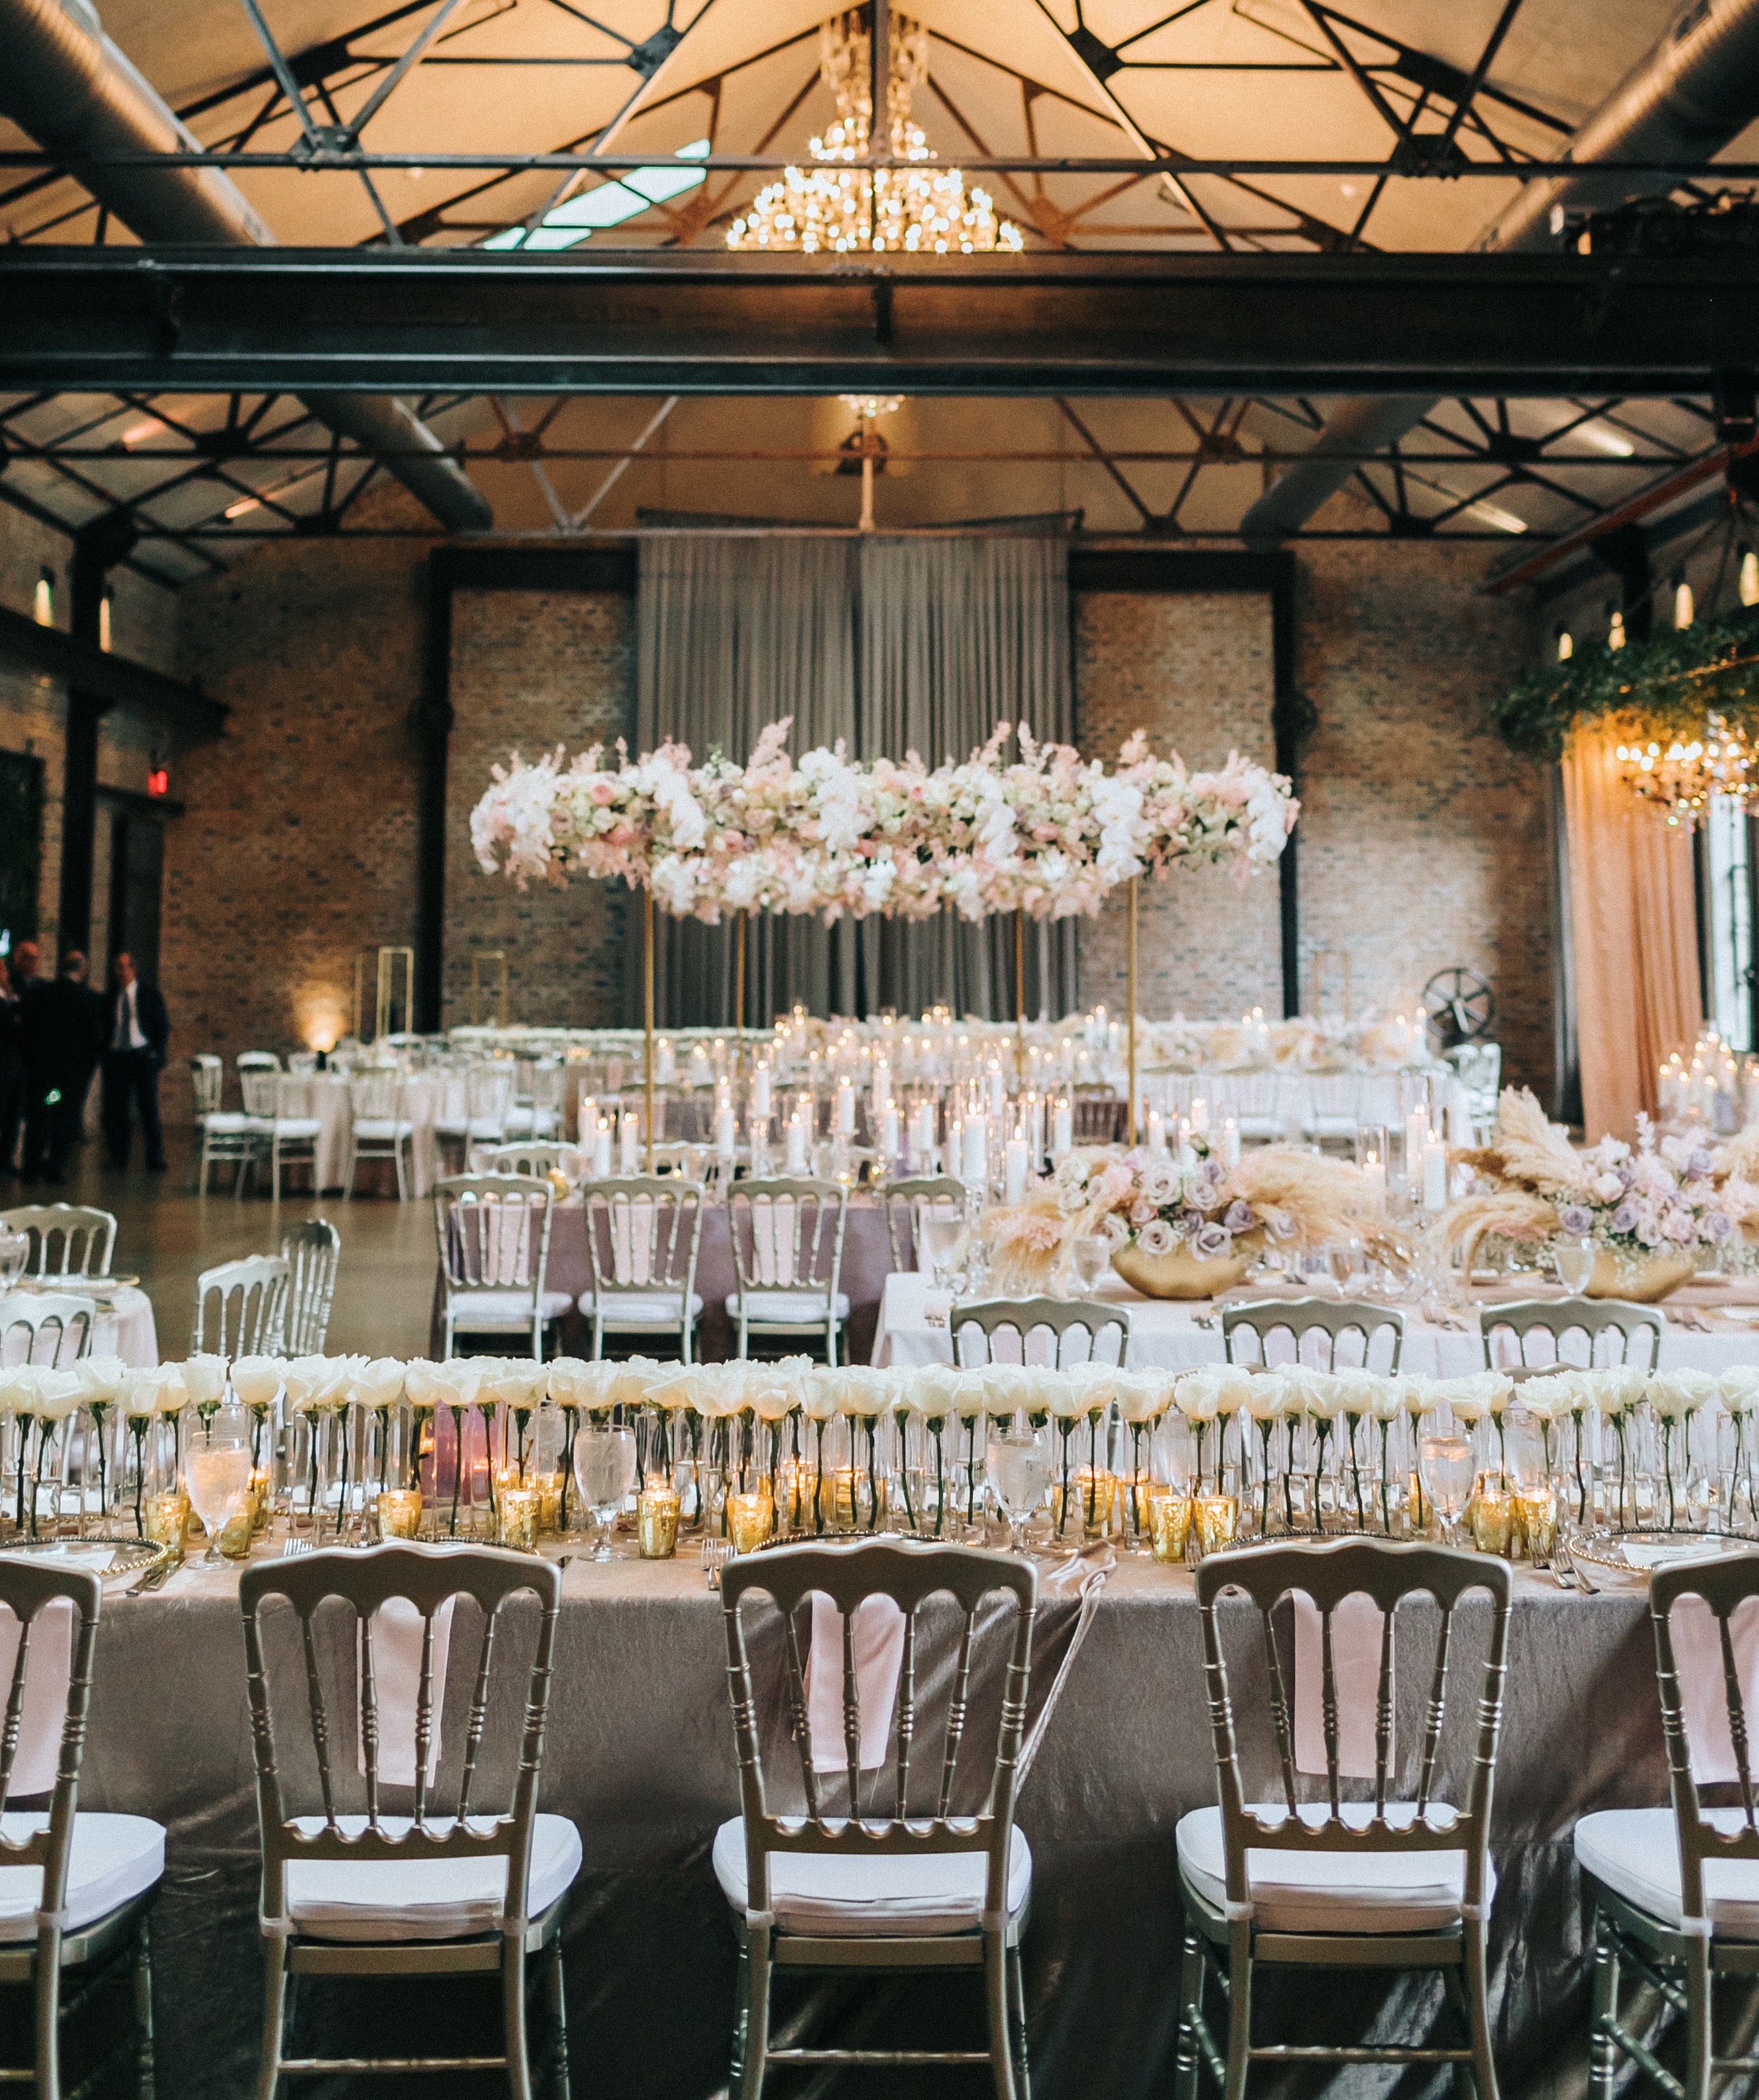 A wedding reception is decorated with white, pink and lilac flowers and decor.